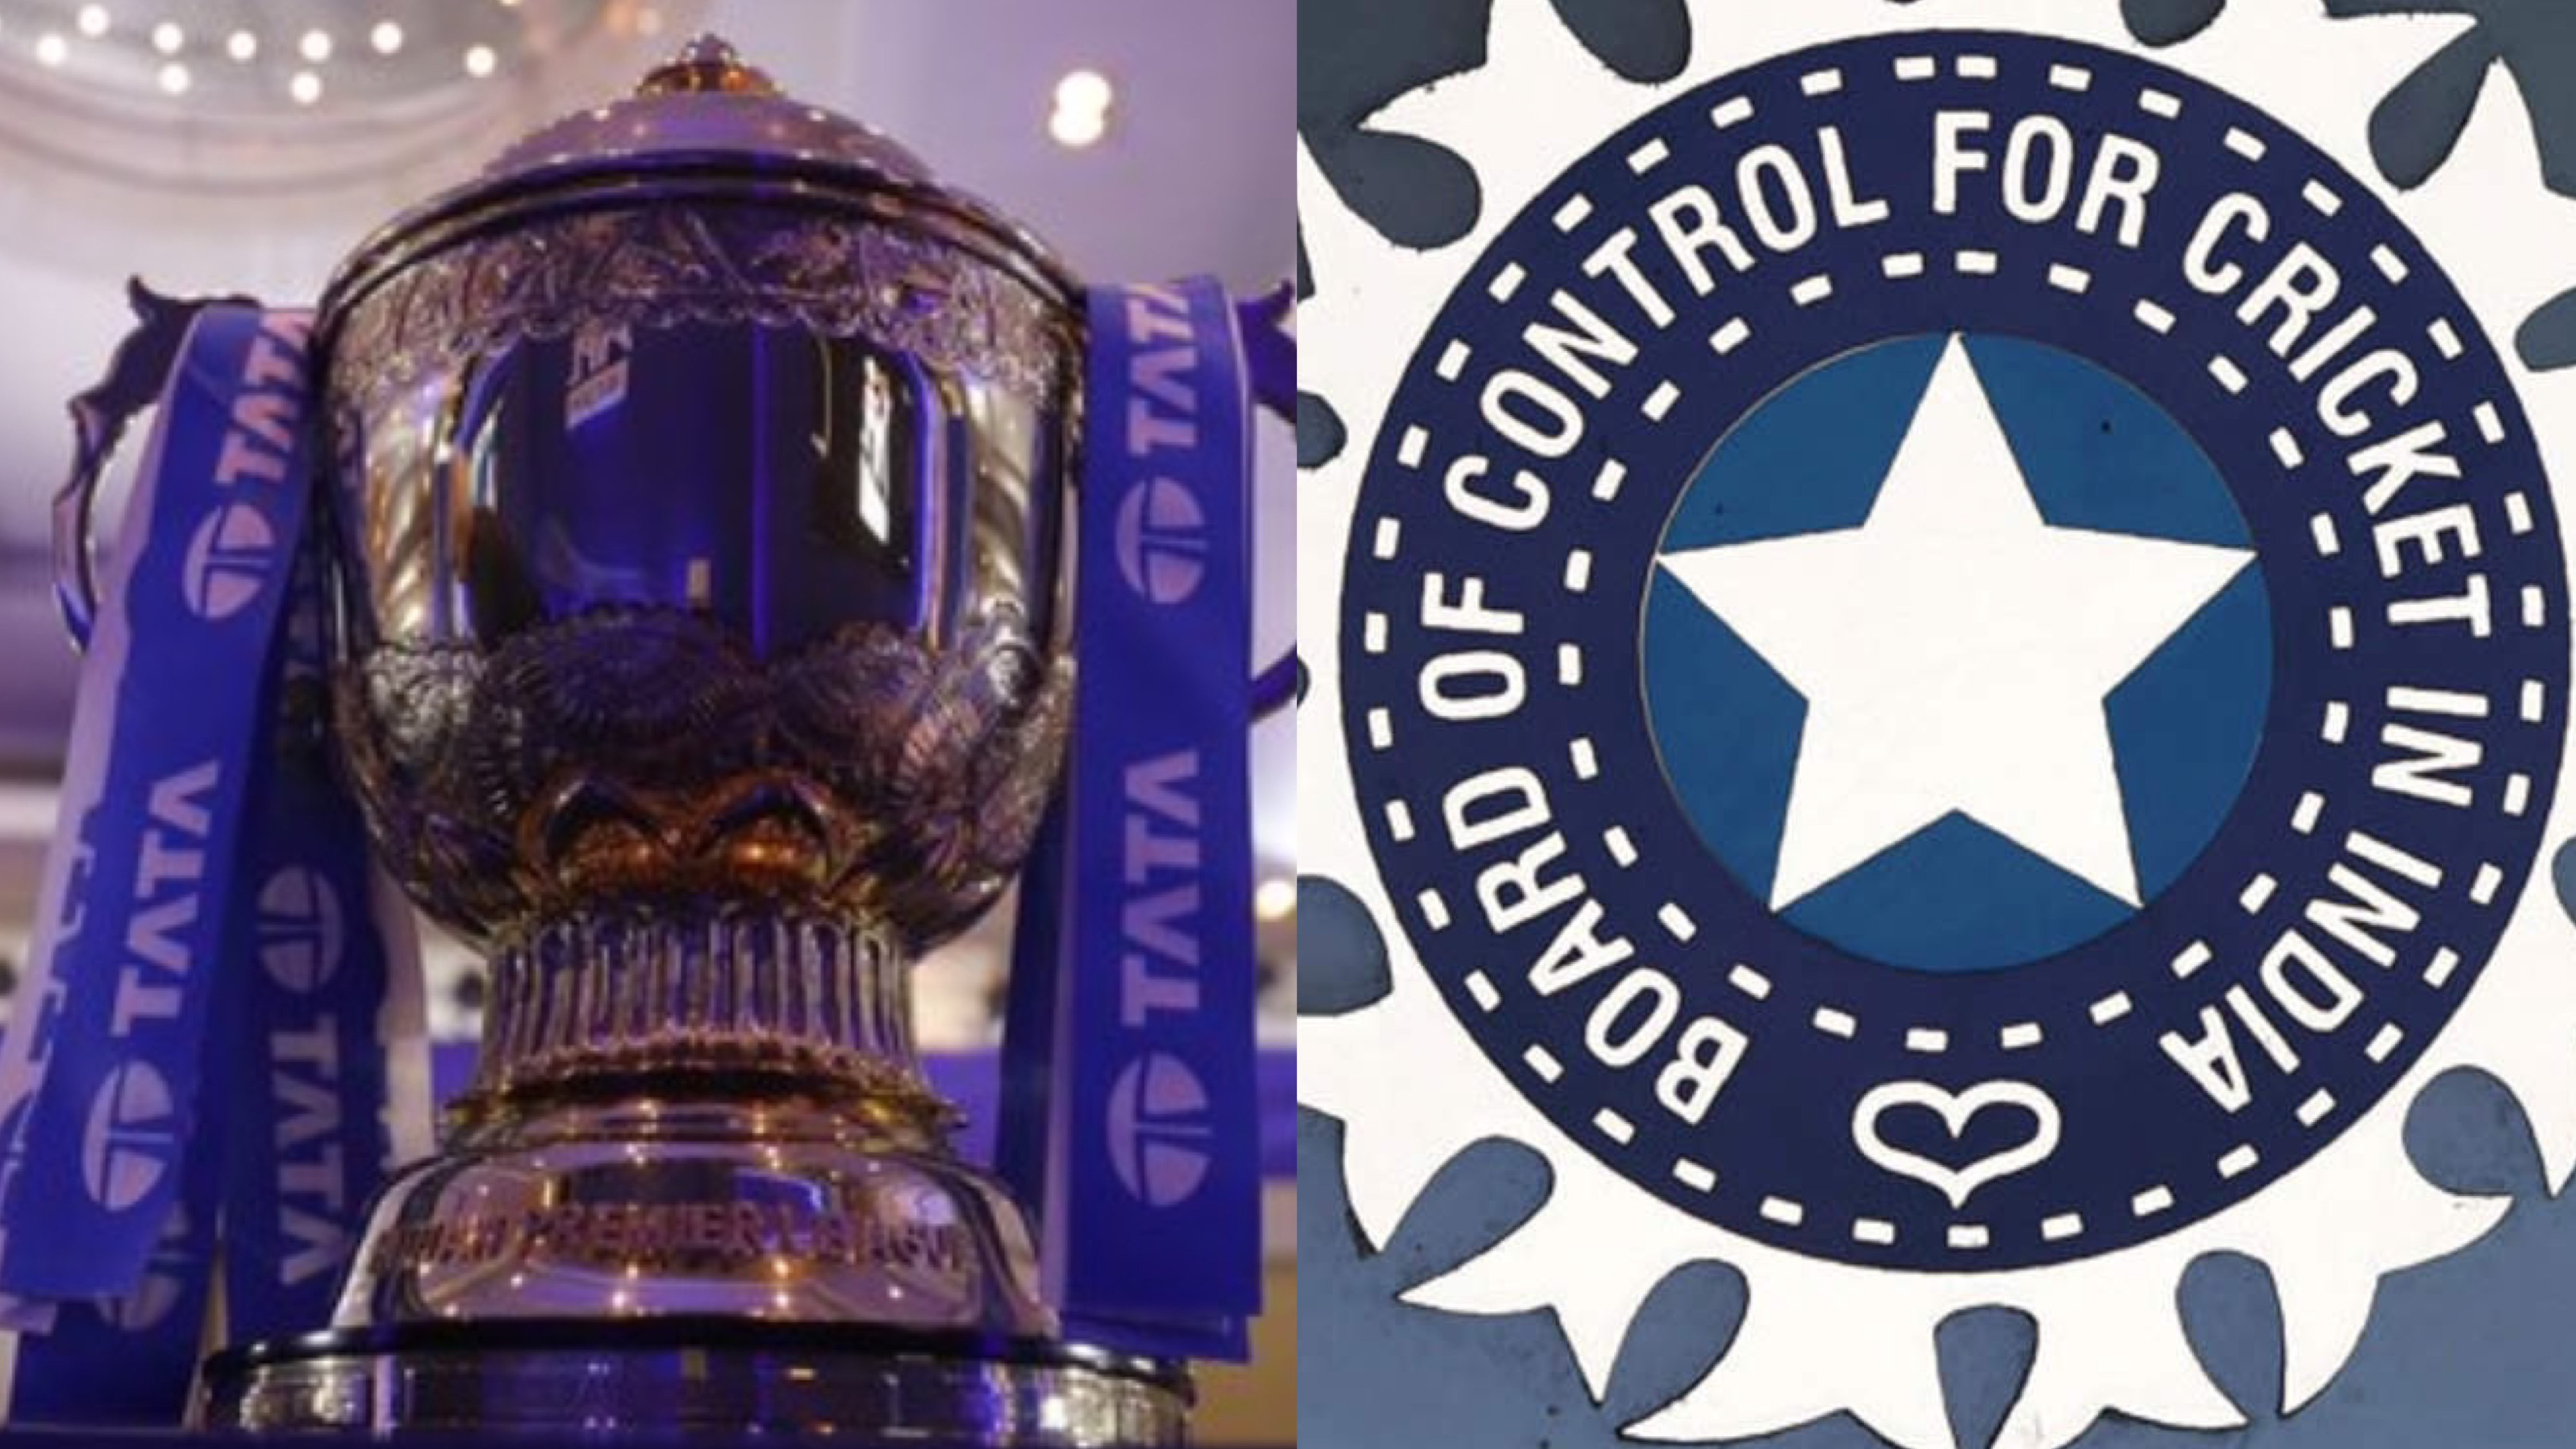 BCCI to introduce the concept of substitute 'Impact Player' in domestic T20 tournaments, including IPL: Report